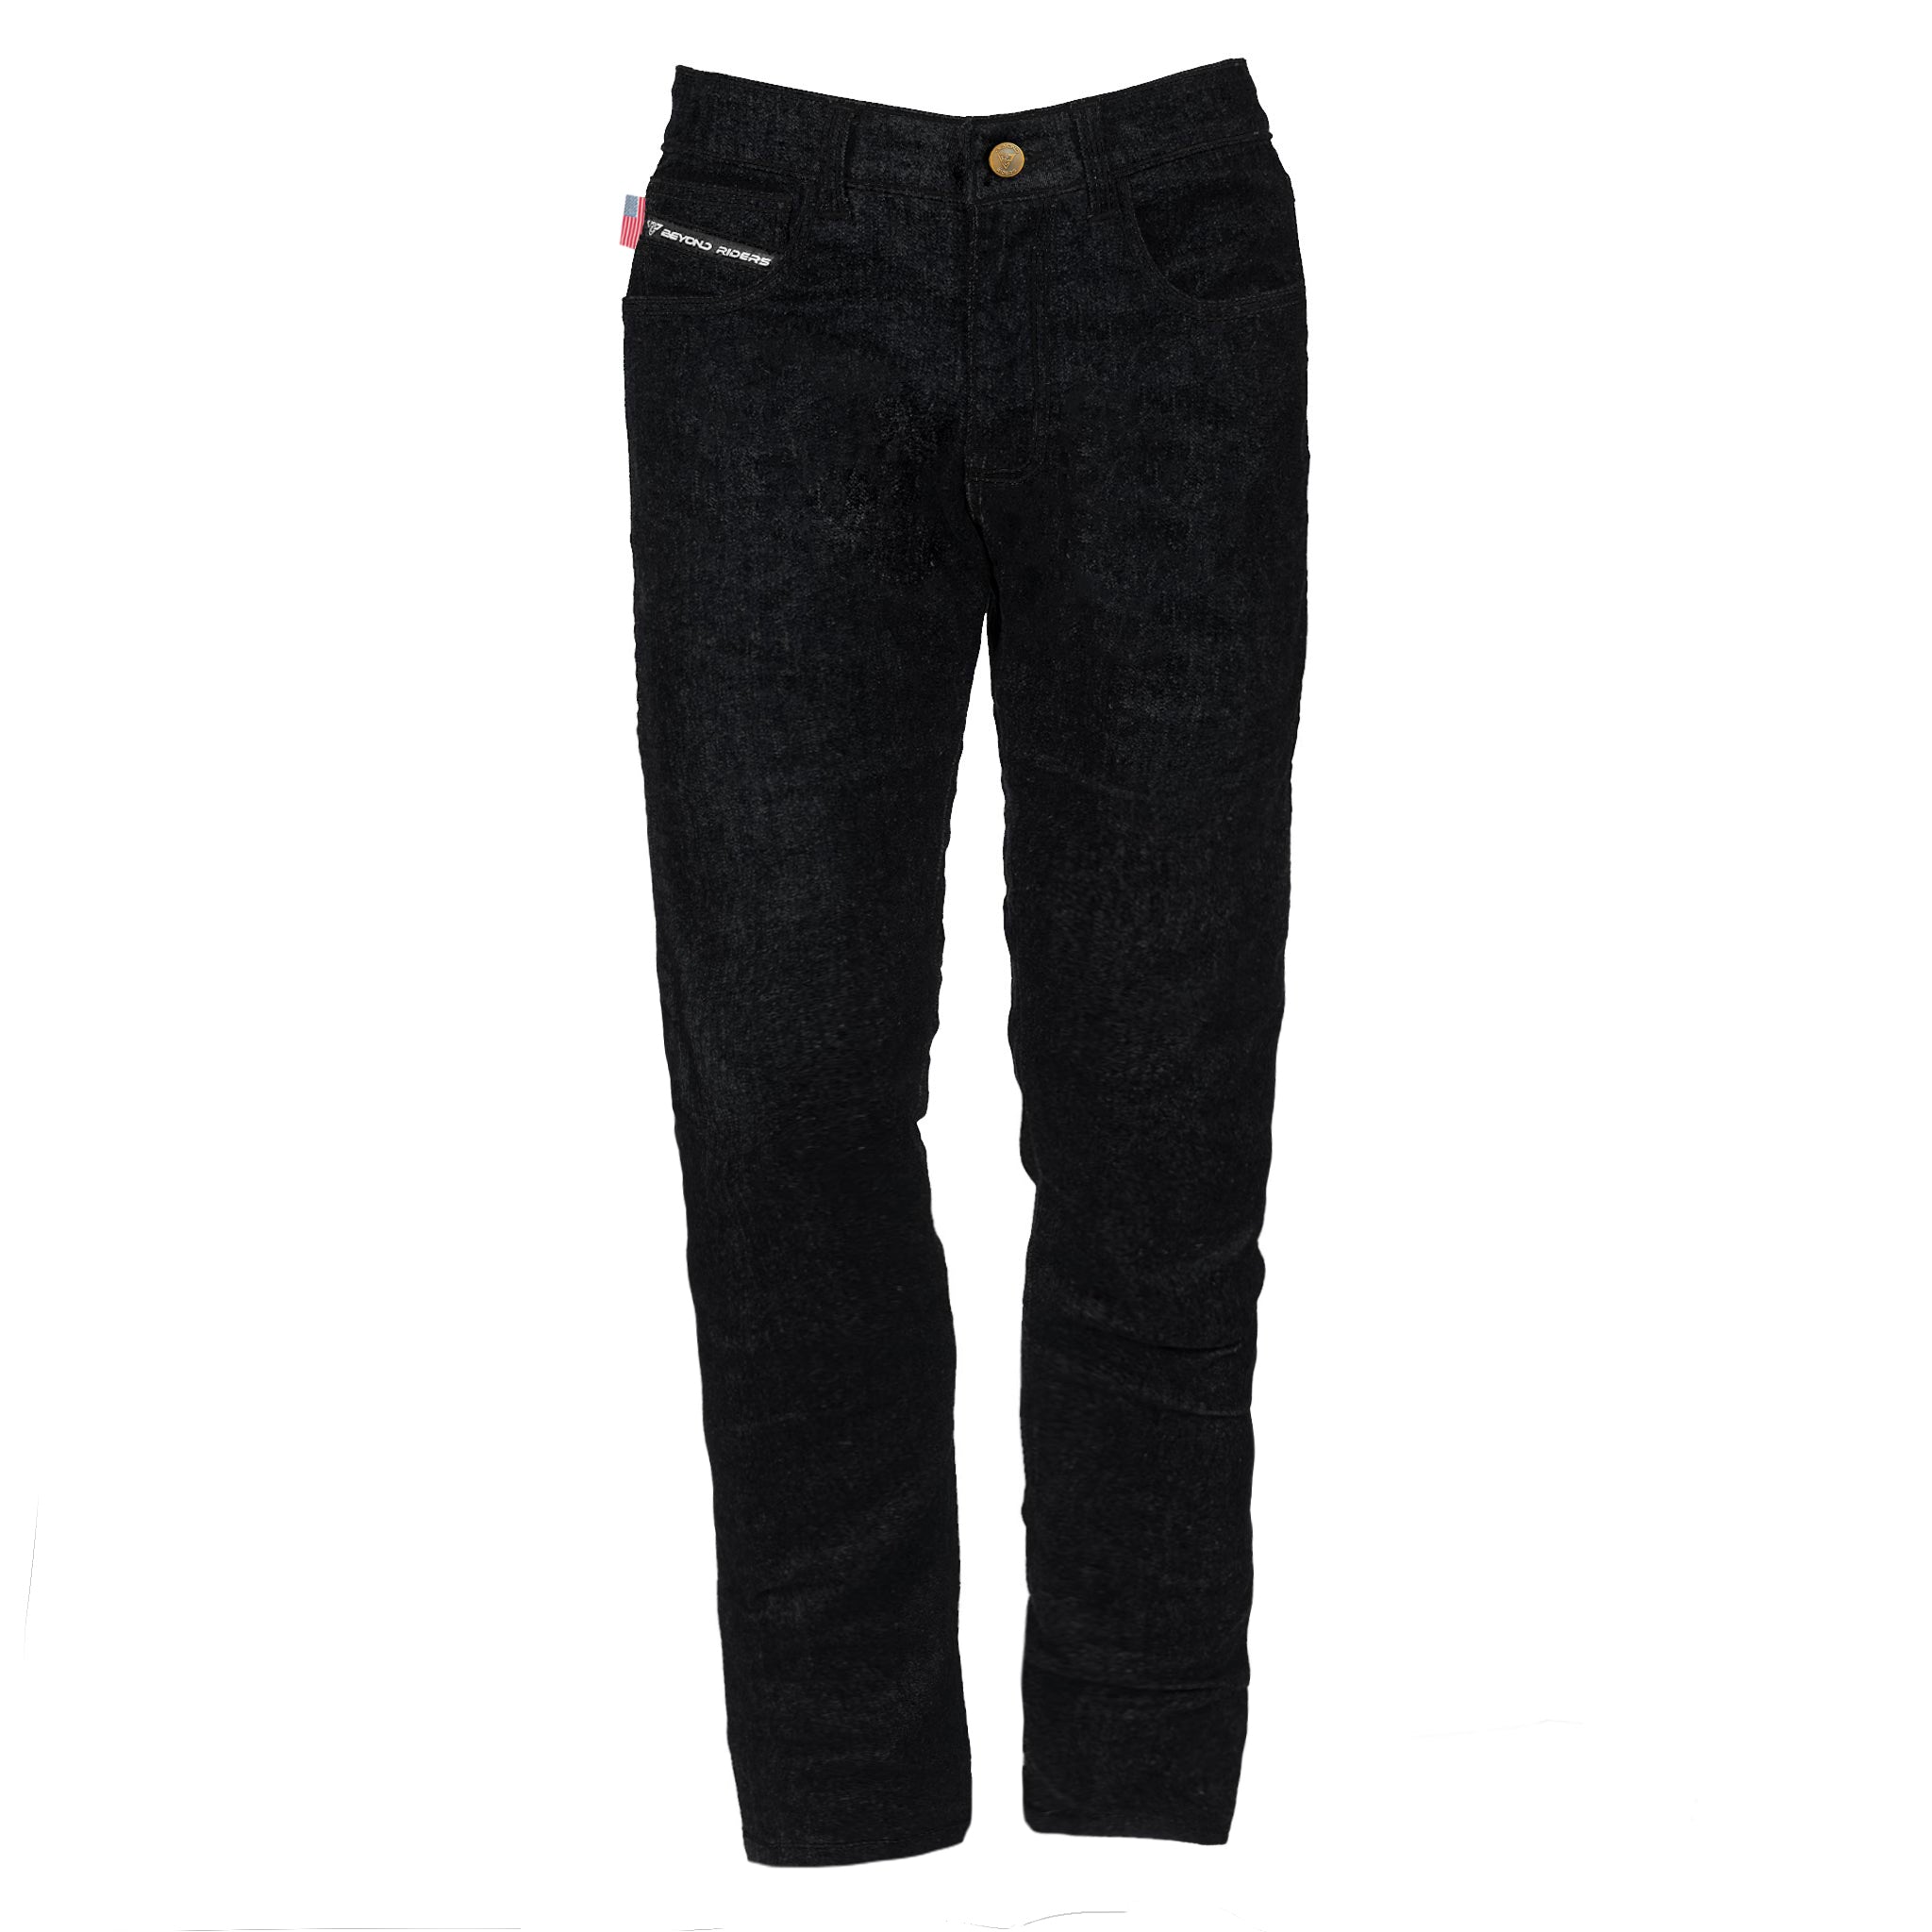 Relaxed Fit Protective Jeans - Black with Pads